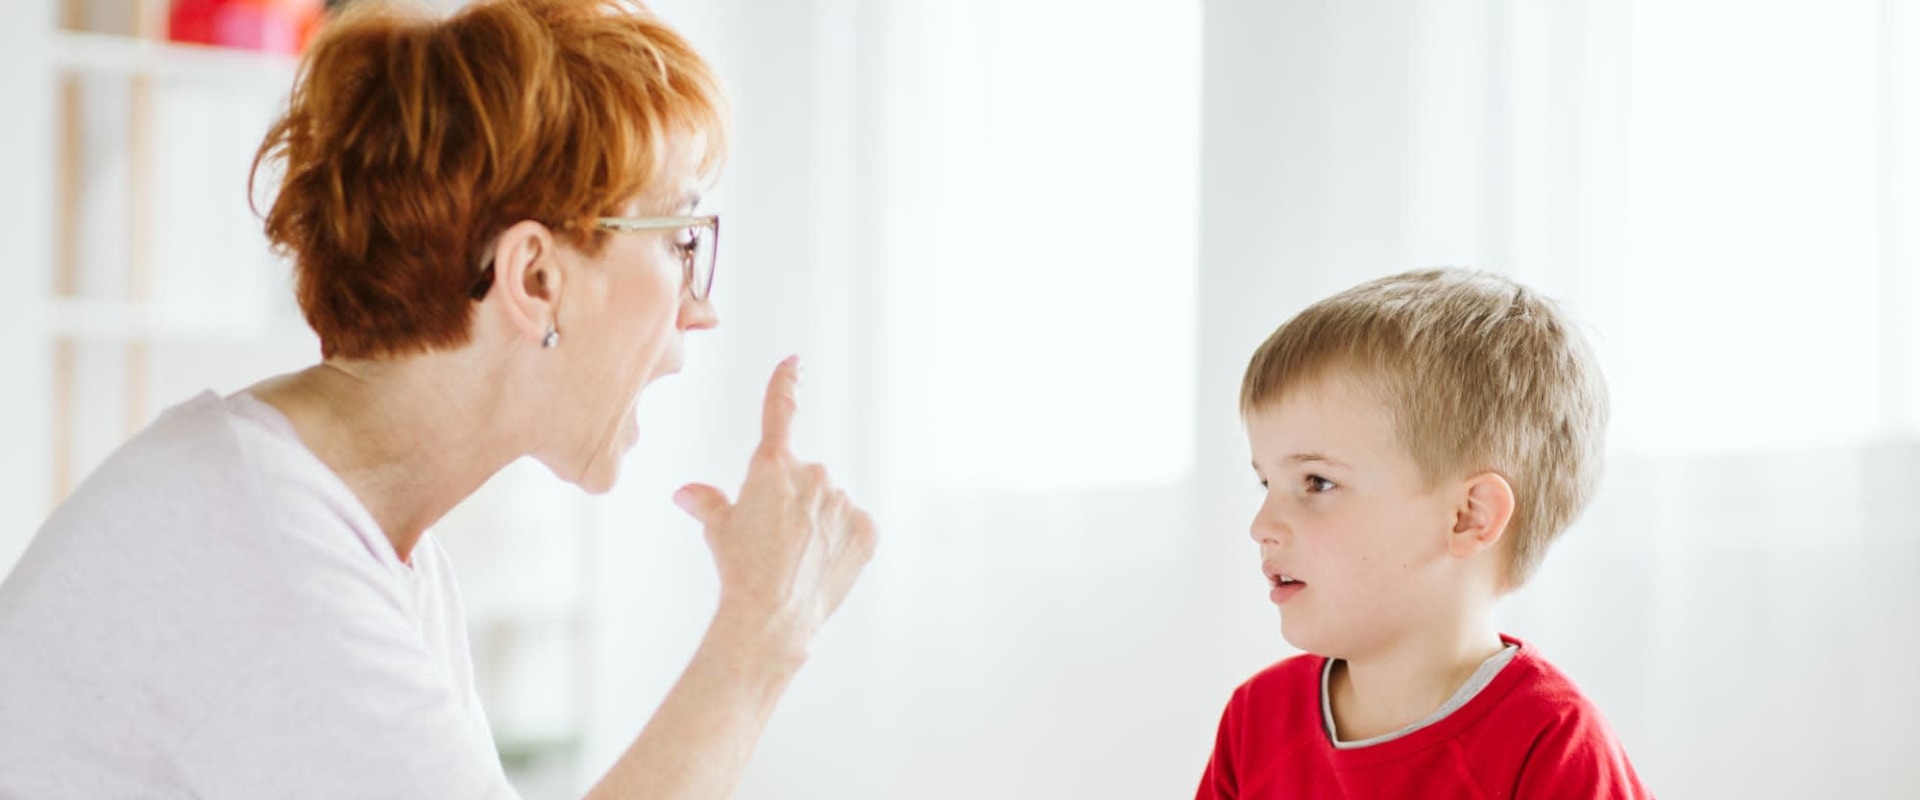 Finding Support for Parents of Children with Communication Disorders